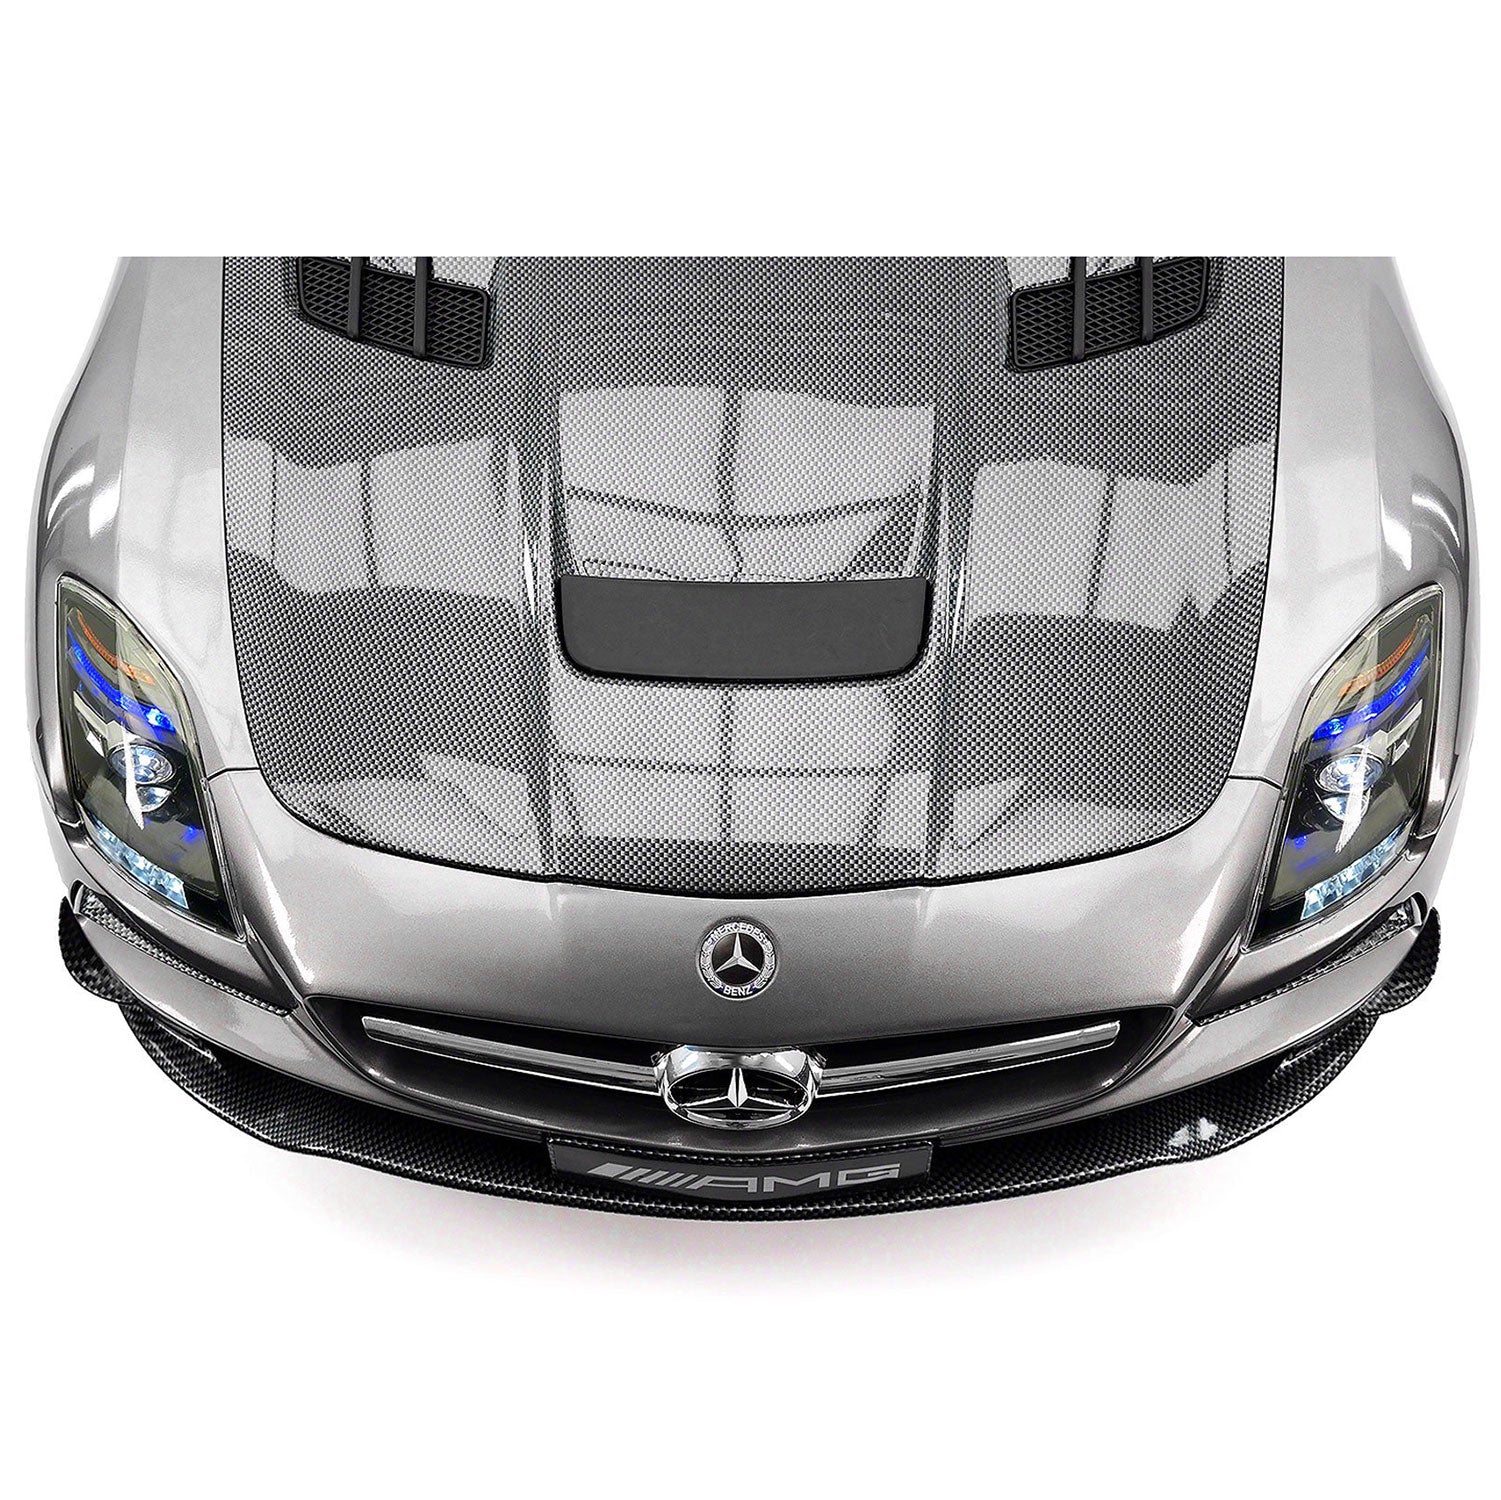 Mercedes Sls Amg Final Edition 12v Kids Ride-on Car With Parental Remote | Gray Metallic